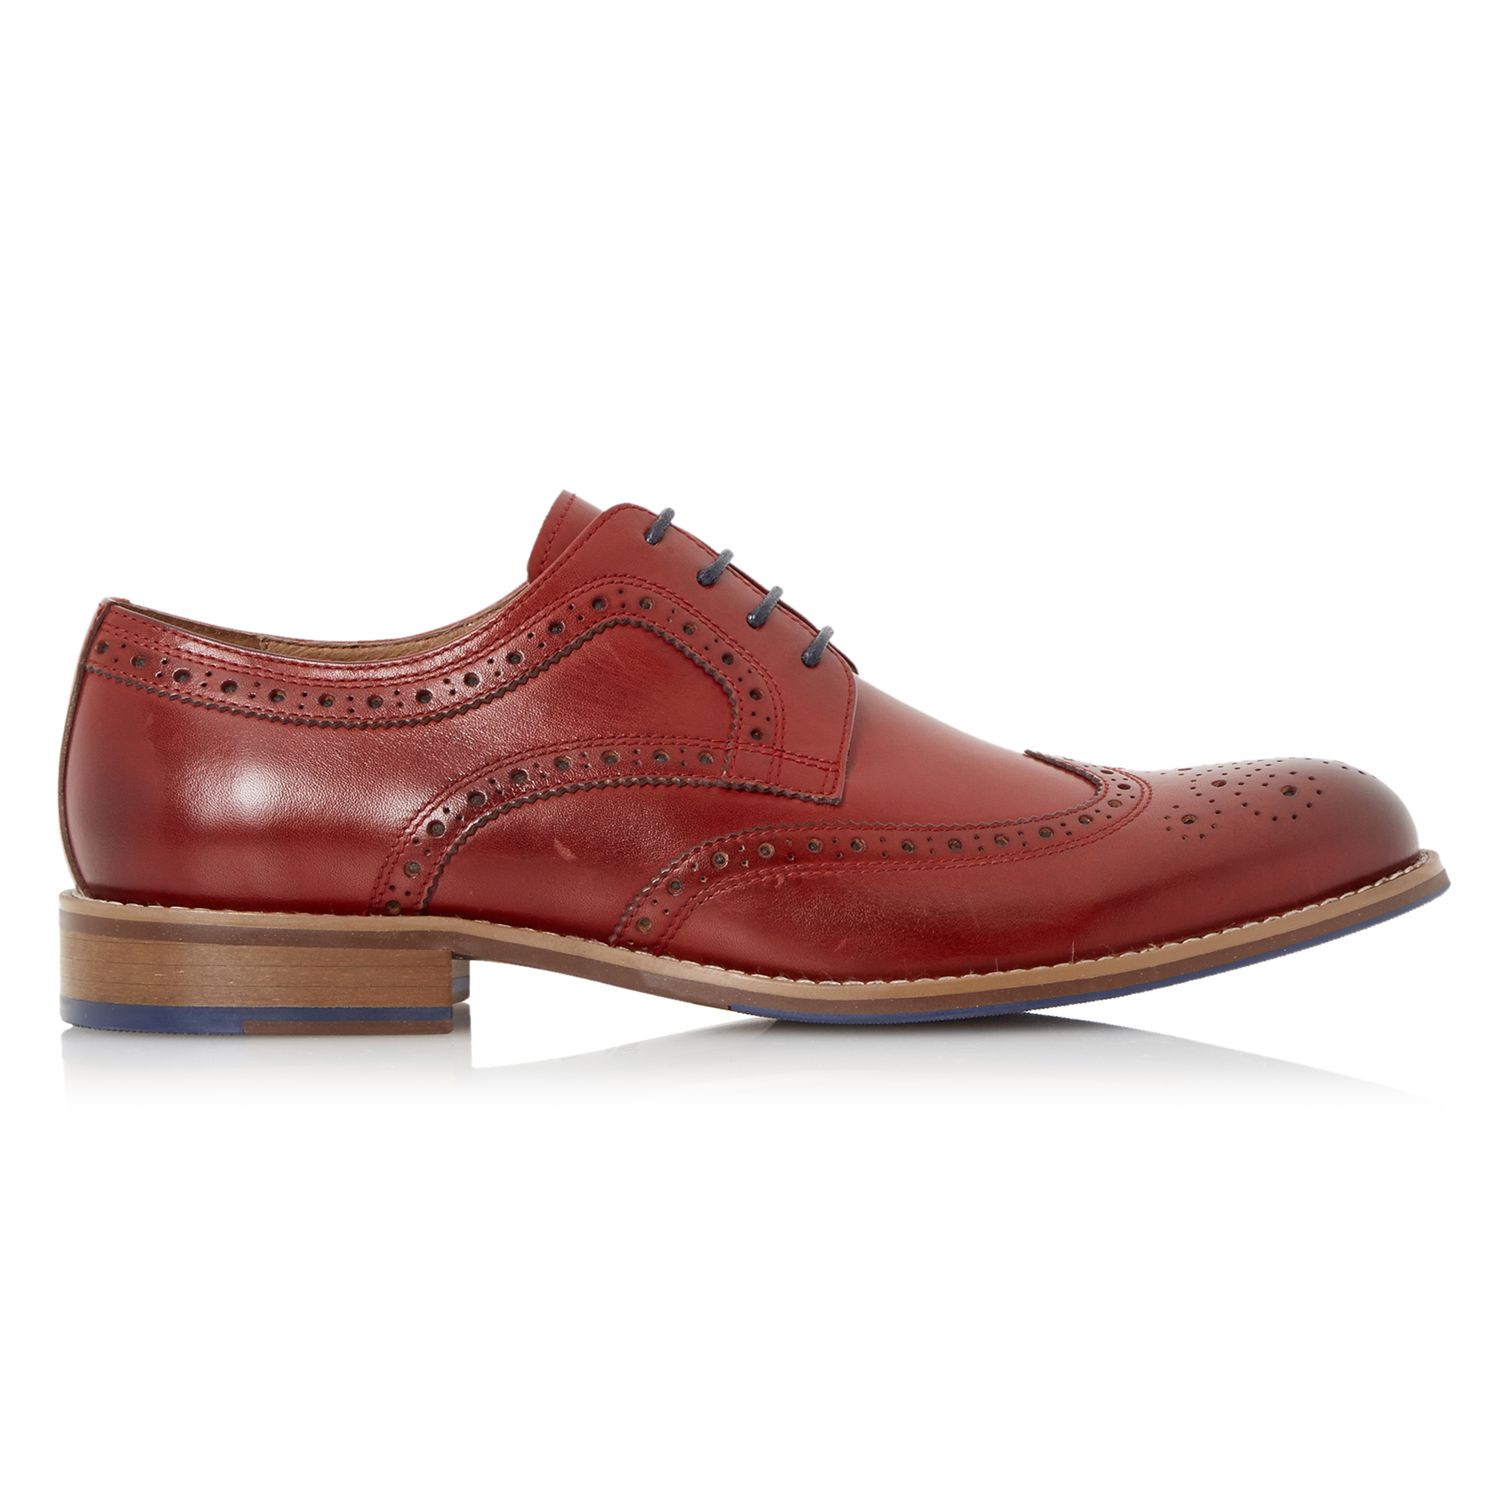 Dune Radcliffe Derby Lace-Up Brogue Shoes